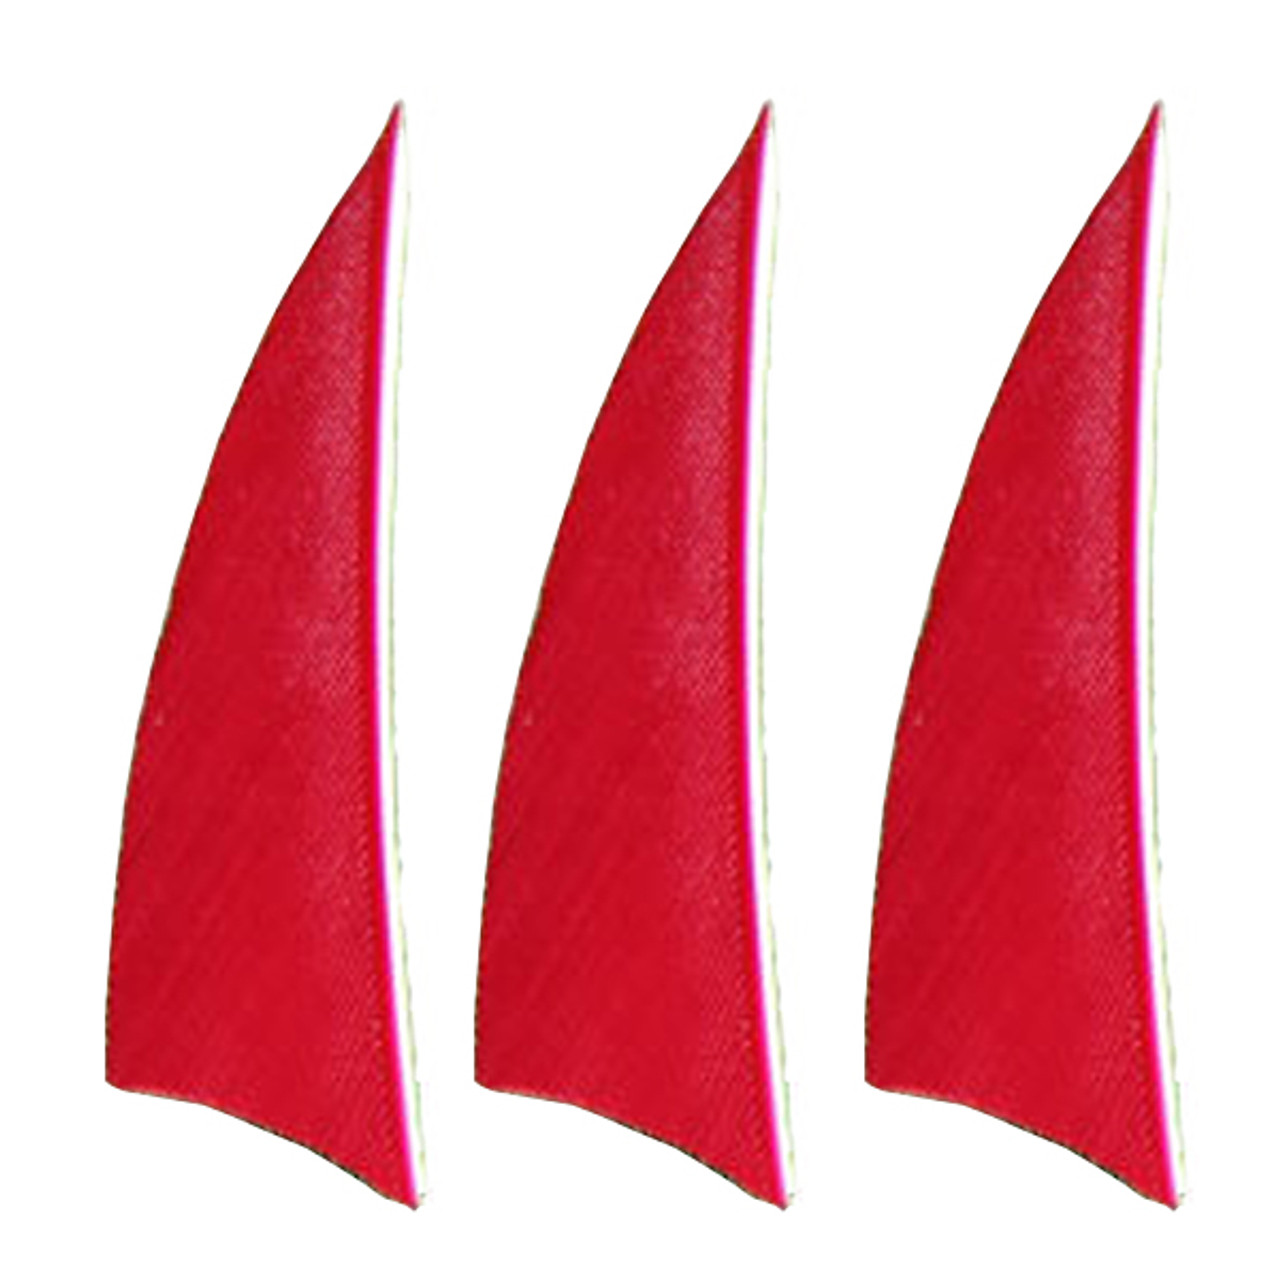 Muddy Buck Gear 2" RW Shield Feathers - 50 Pack (Red)